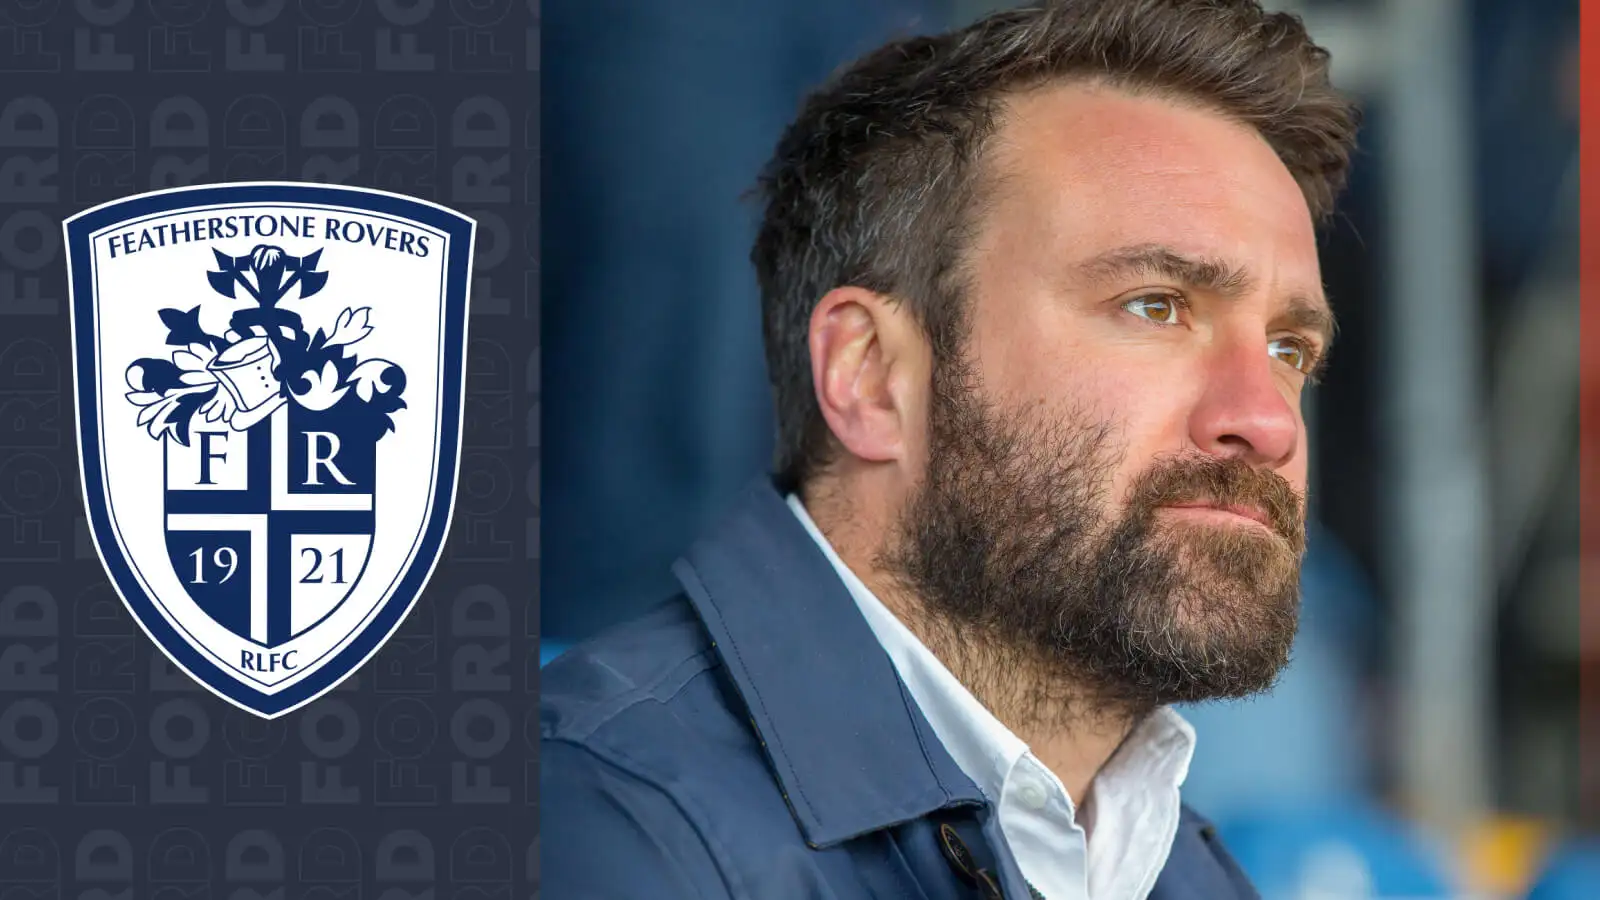 Featherstone Rovers champions but there’s still ‘heaps wrong’: ‘Miserable’ James Ford demands more in order to win promotion